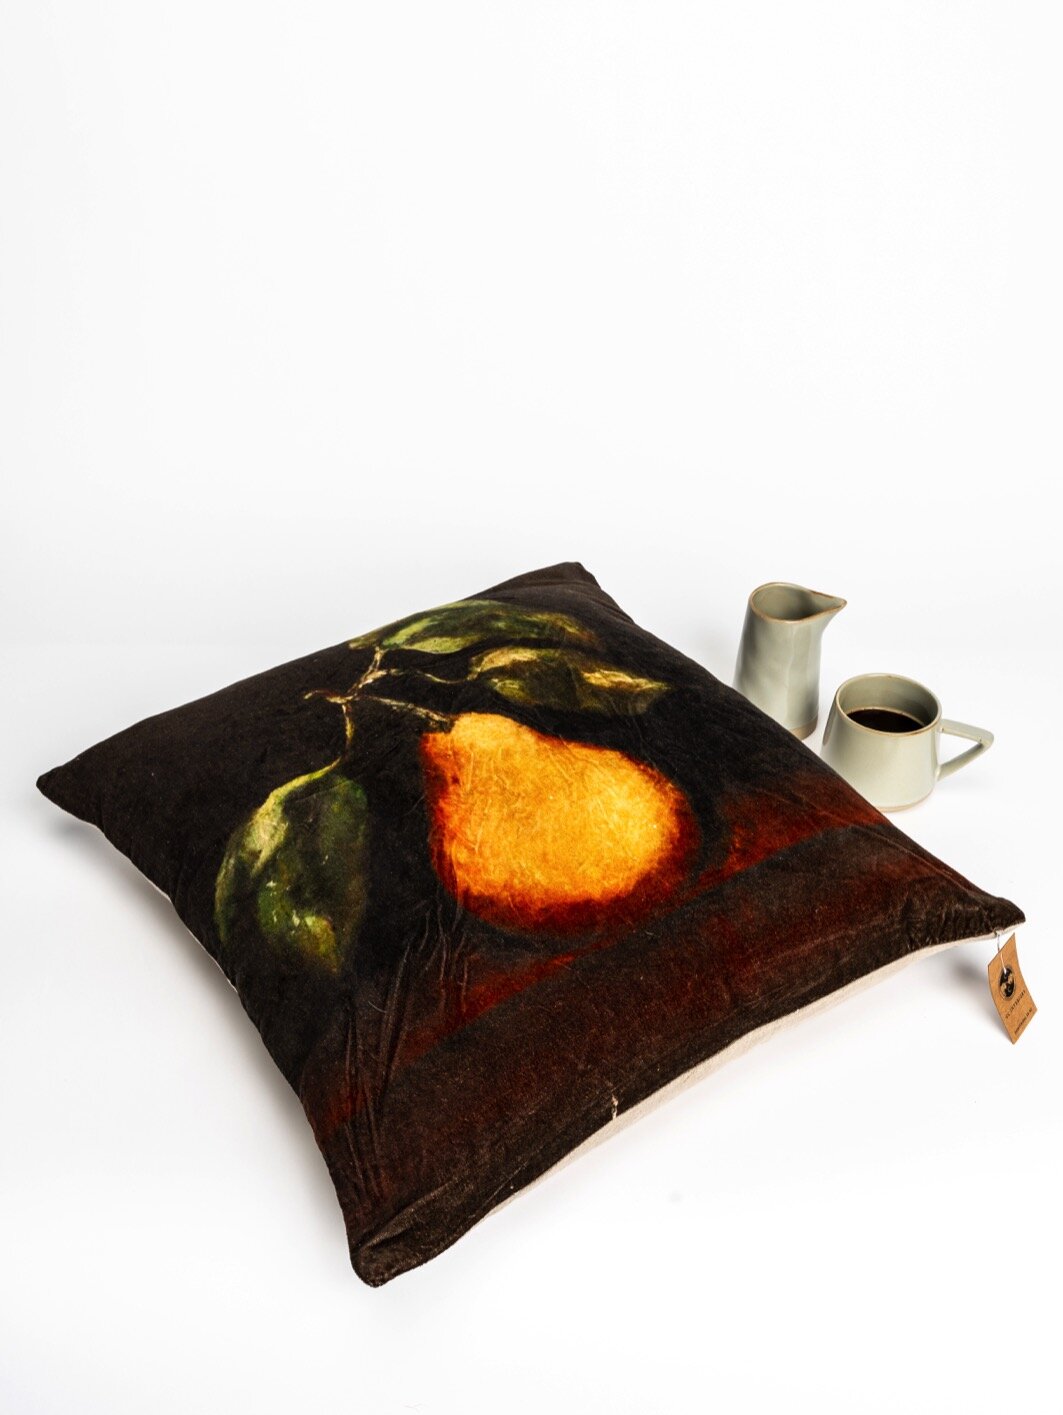 Velvet cushion with pear on front